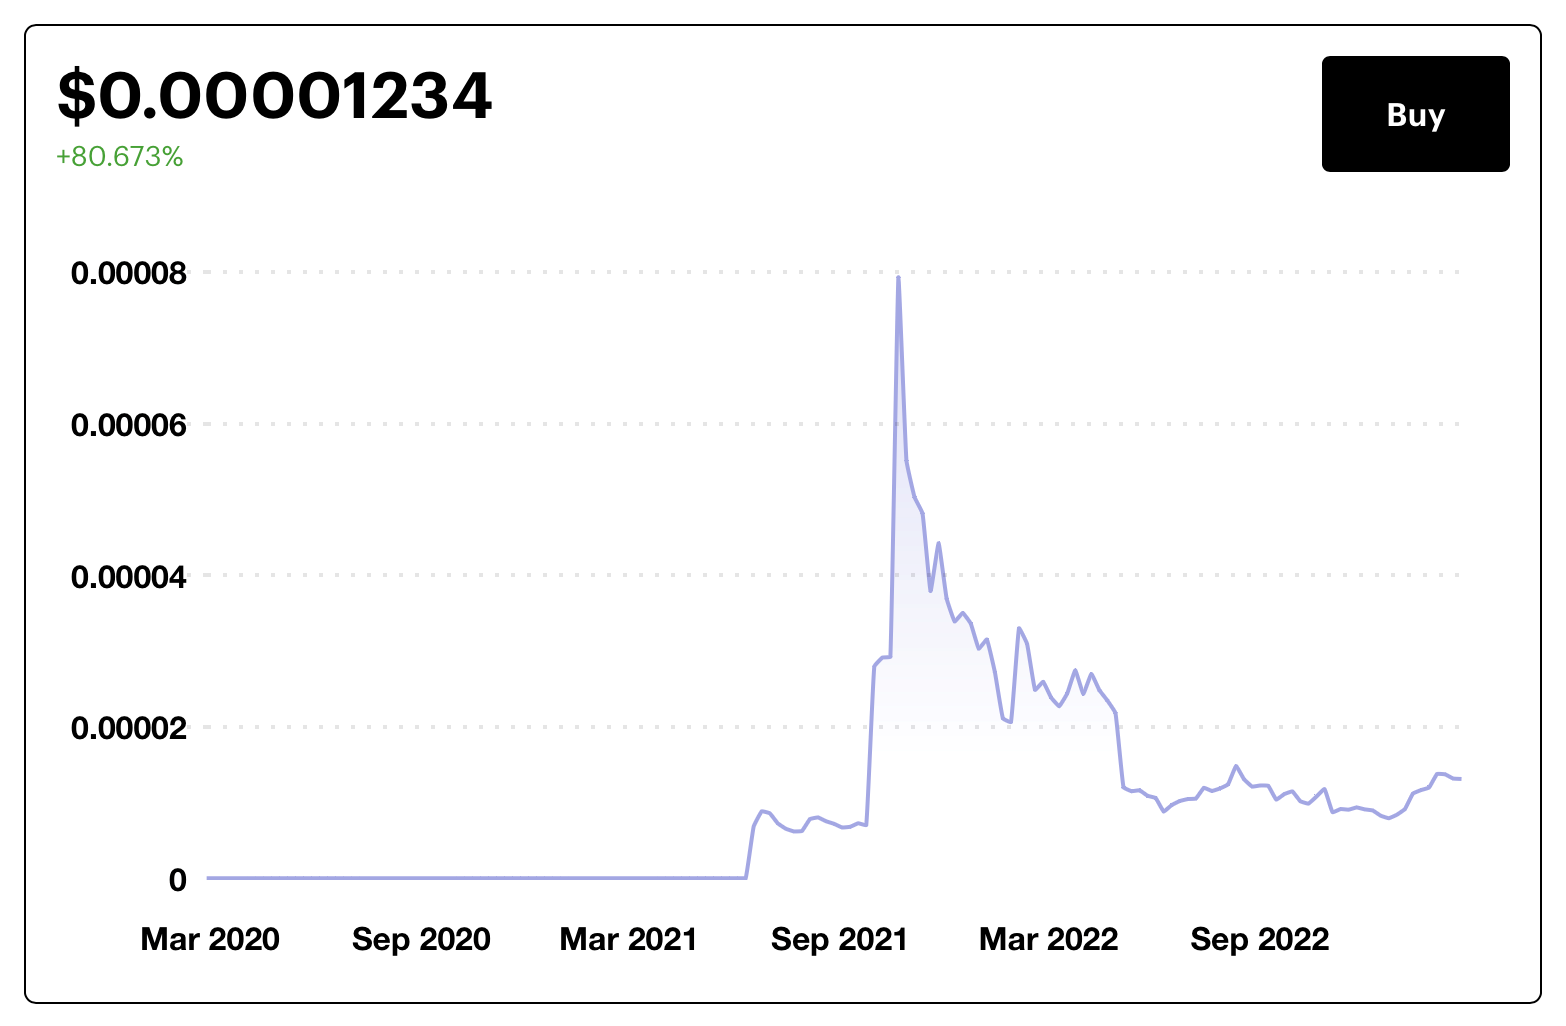 Shiba-Inu-SHIB-tokens-price-surged-400x-within-seven-months.png